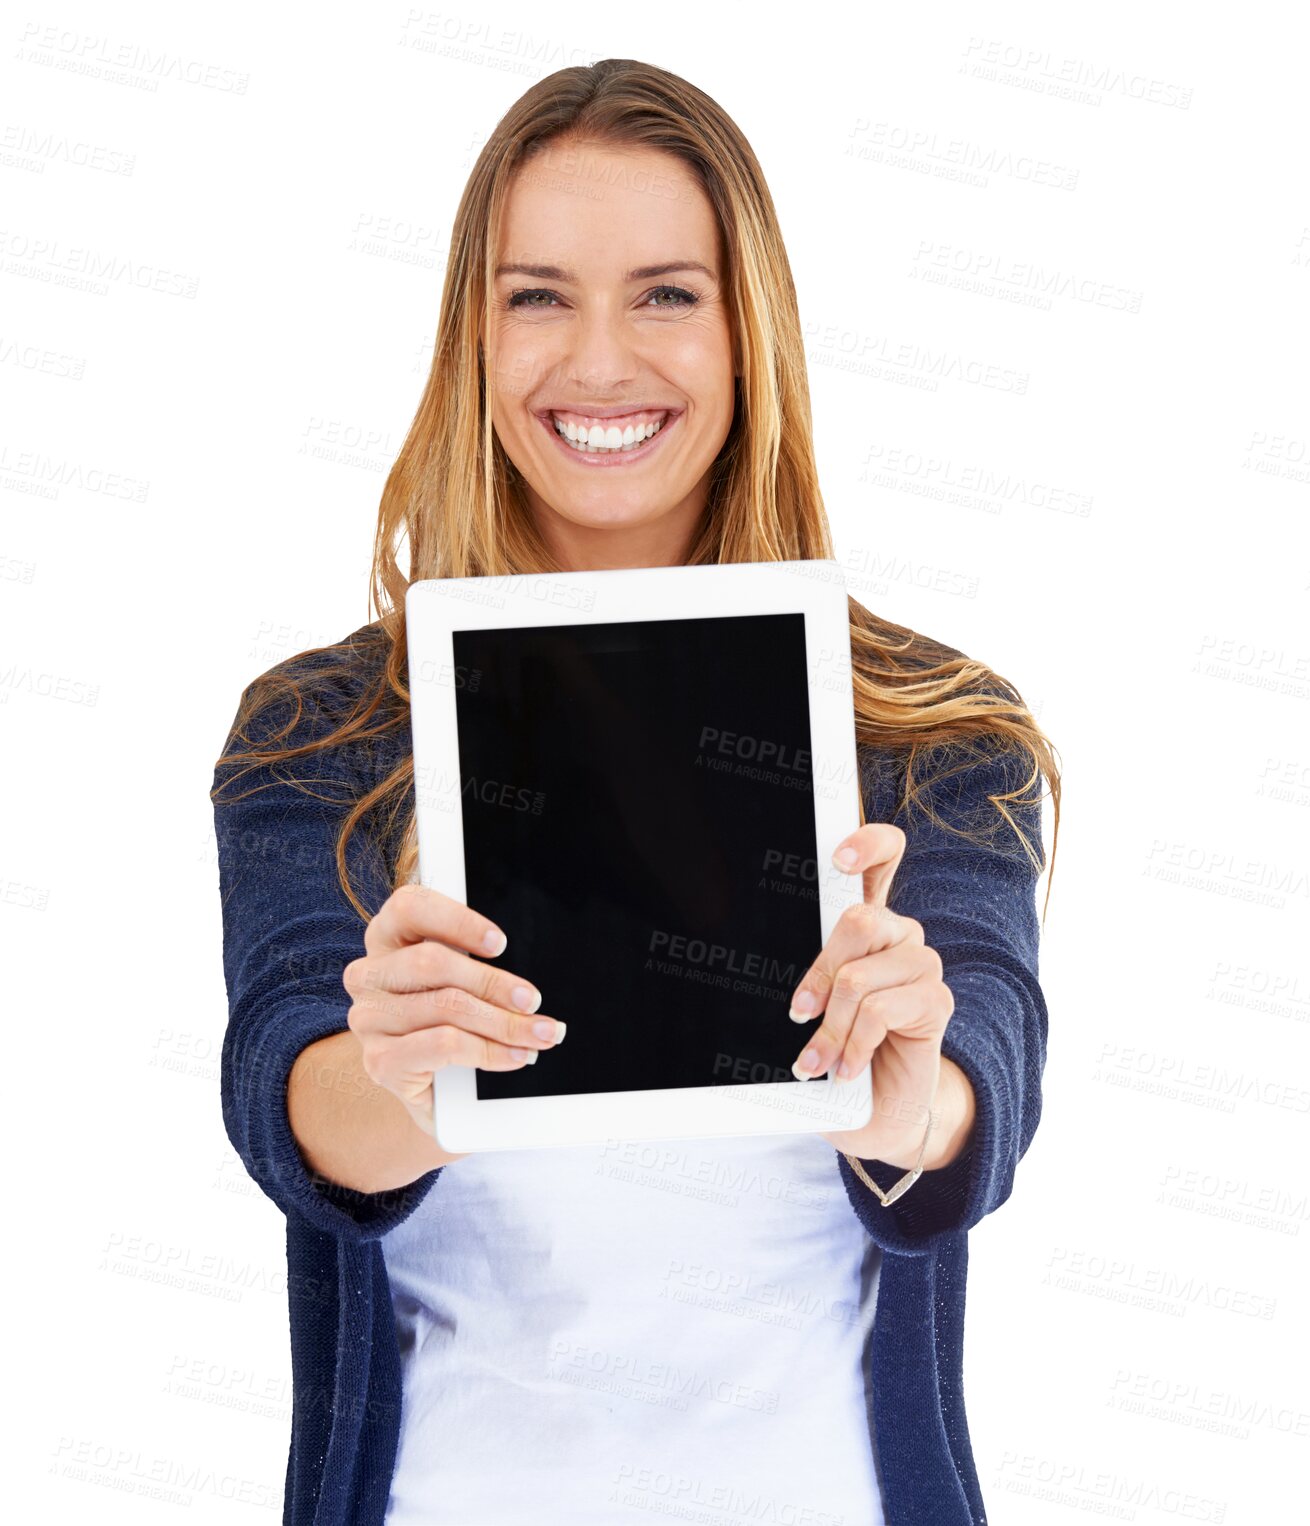 Buy stock photo Portrait of happy woman, showing tablet and isolated on transparent png background for website promo. Happy model, mockup and digital app for online technology, application and internet announcement.